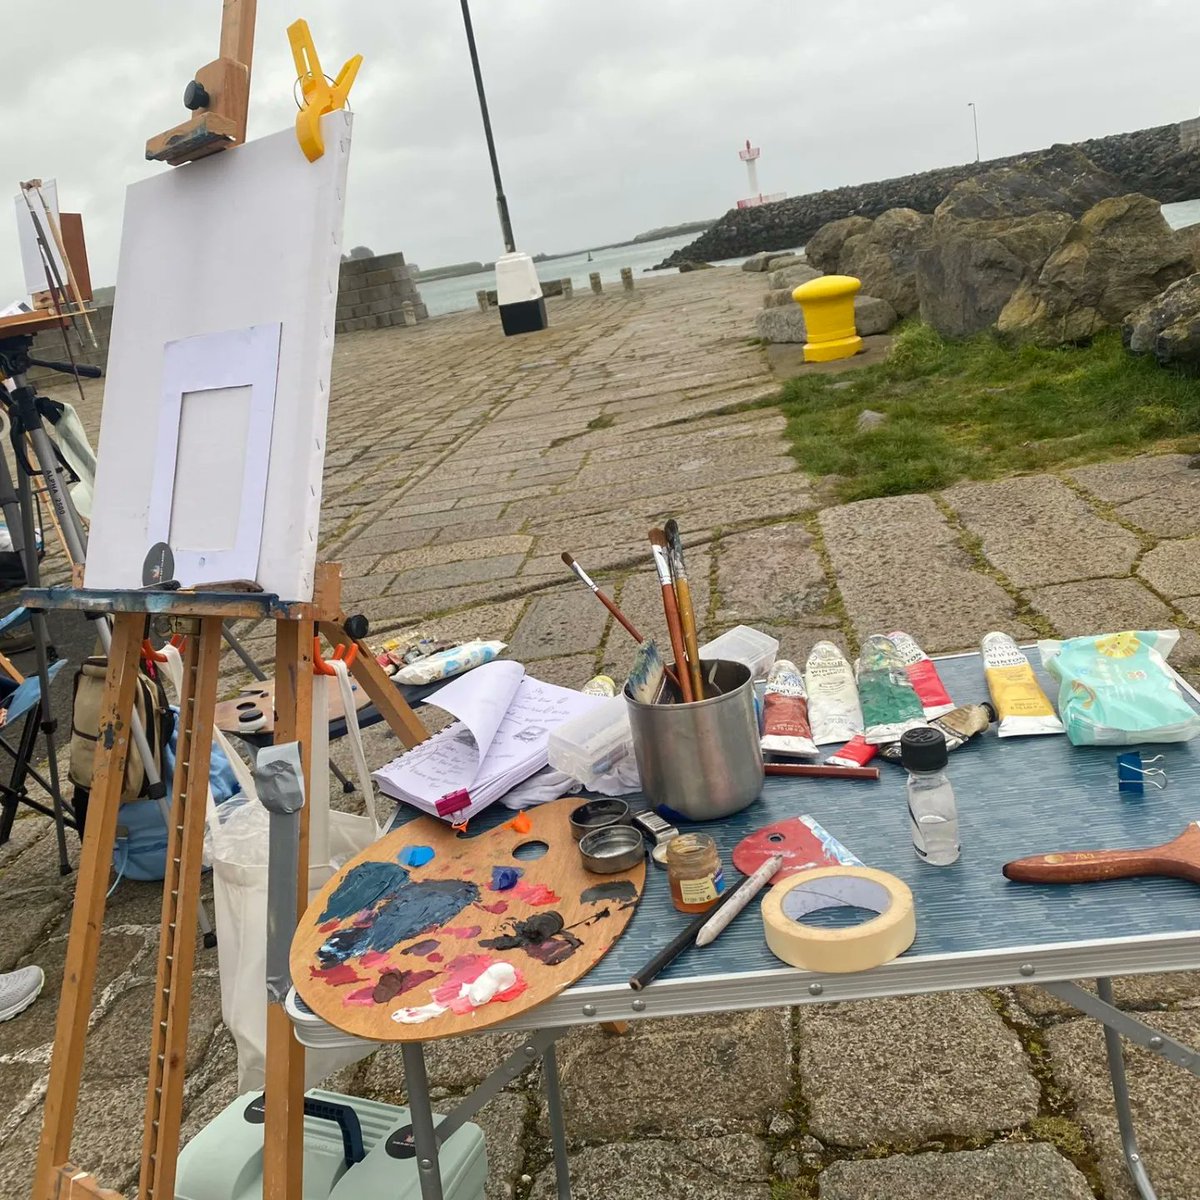 One of our artists getting set up for some en plein air painting at Howth Pier. #howth #painting #enpleinair #oilpainting